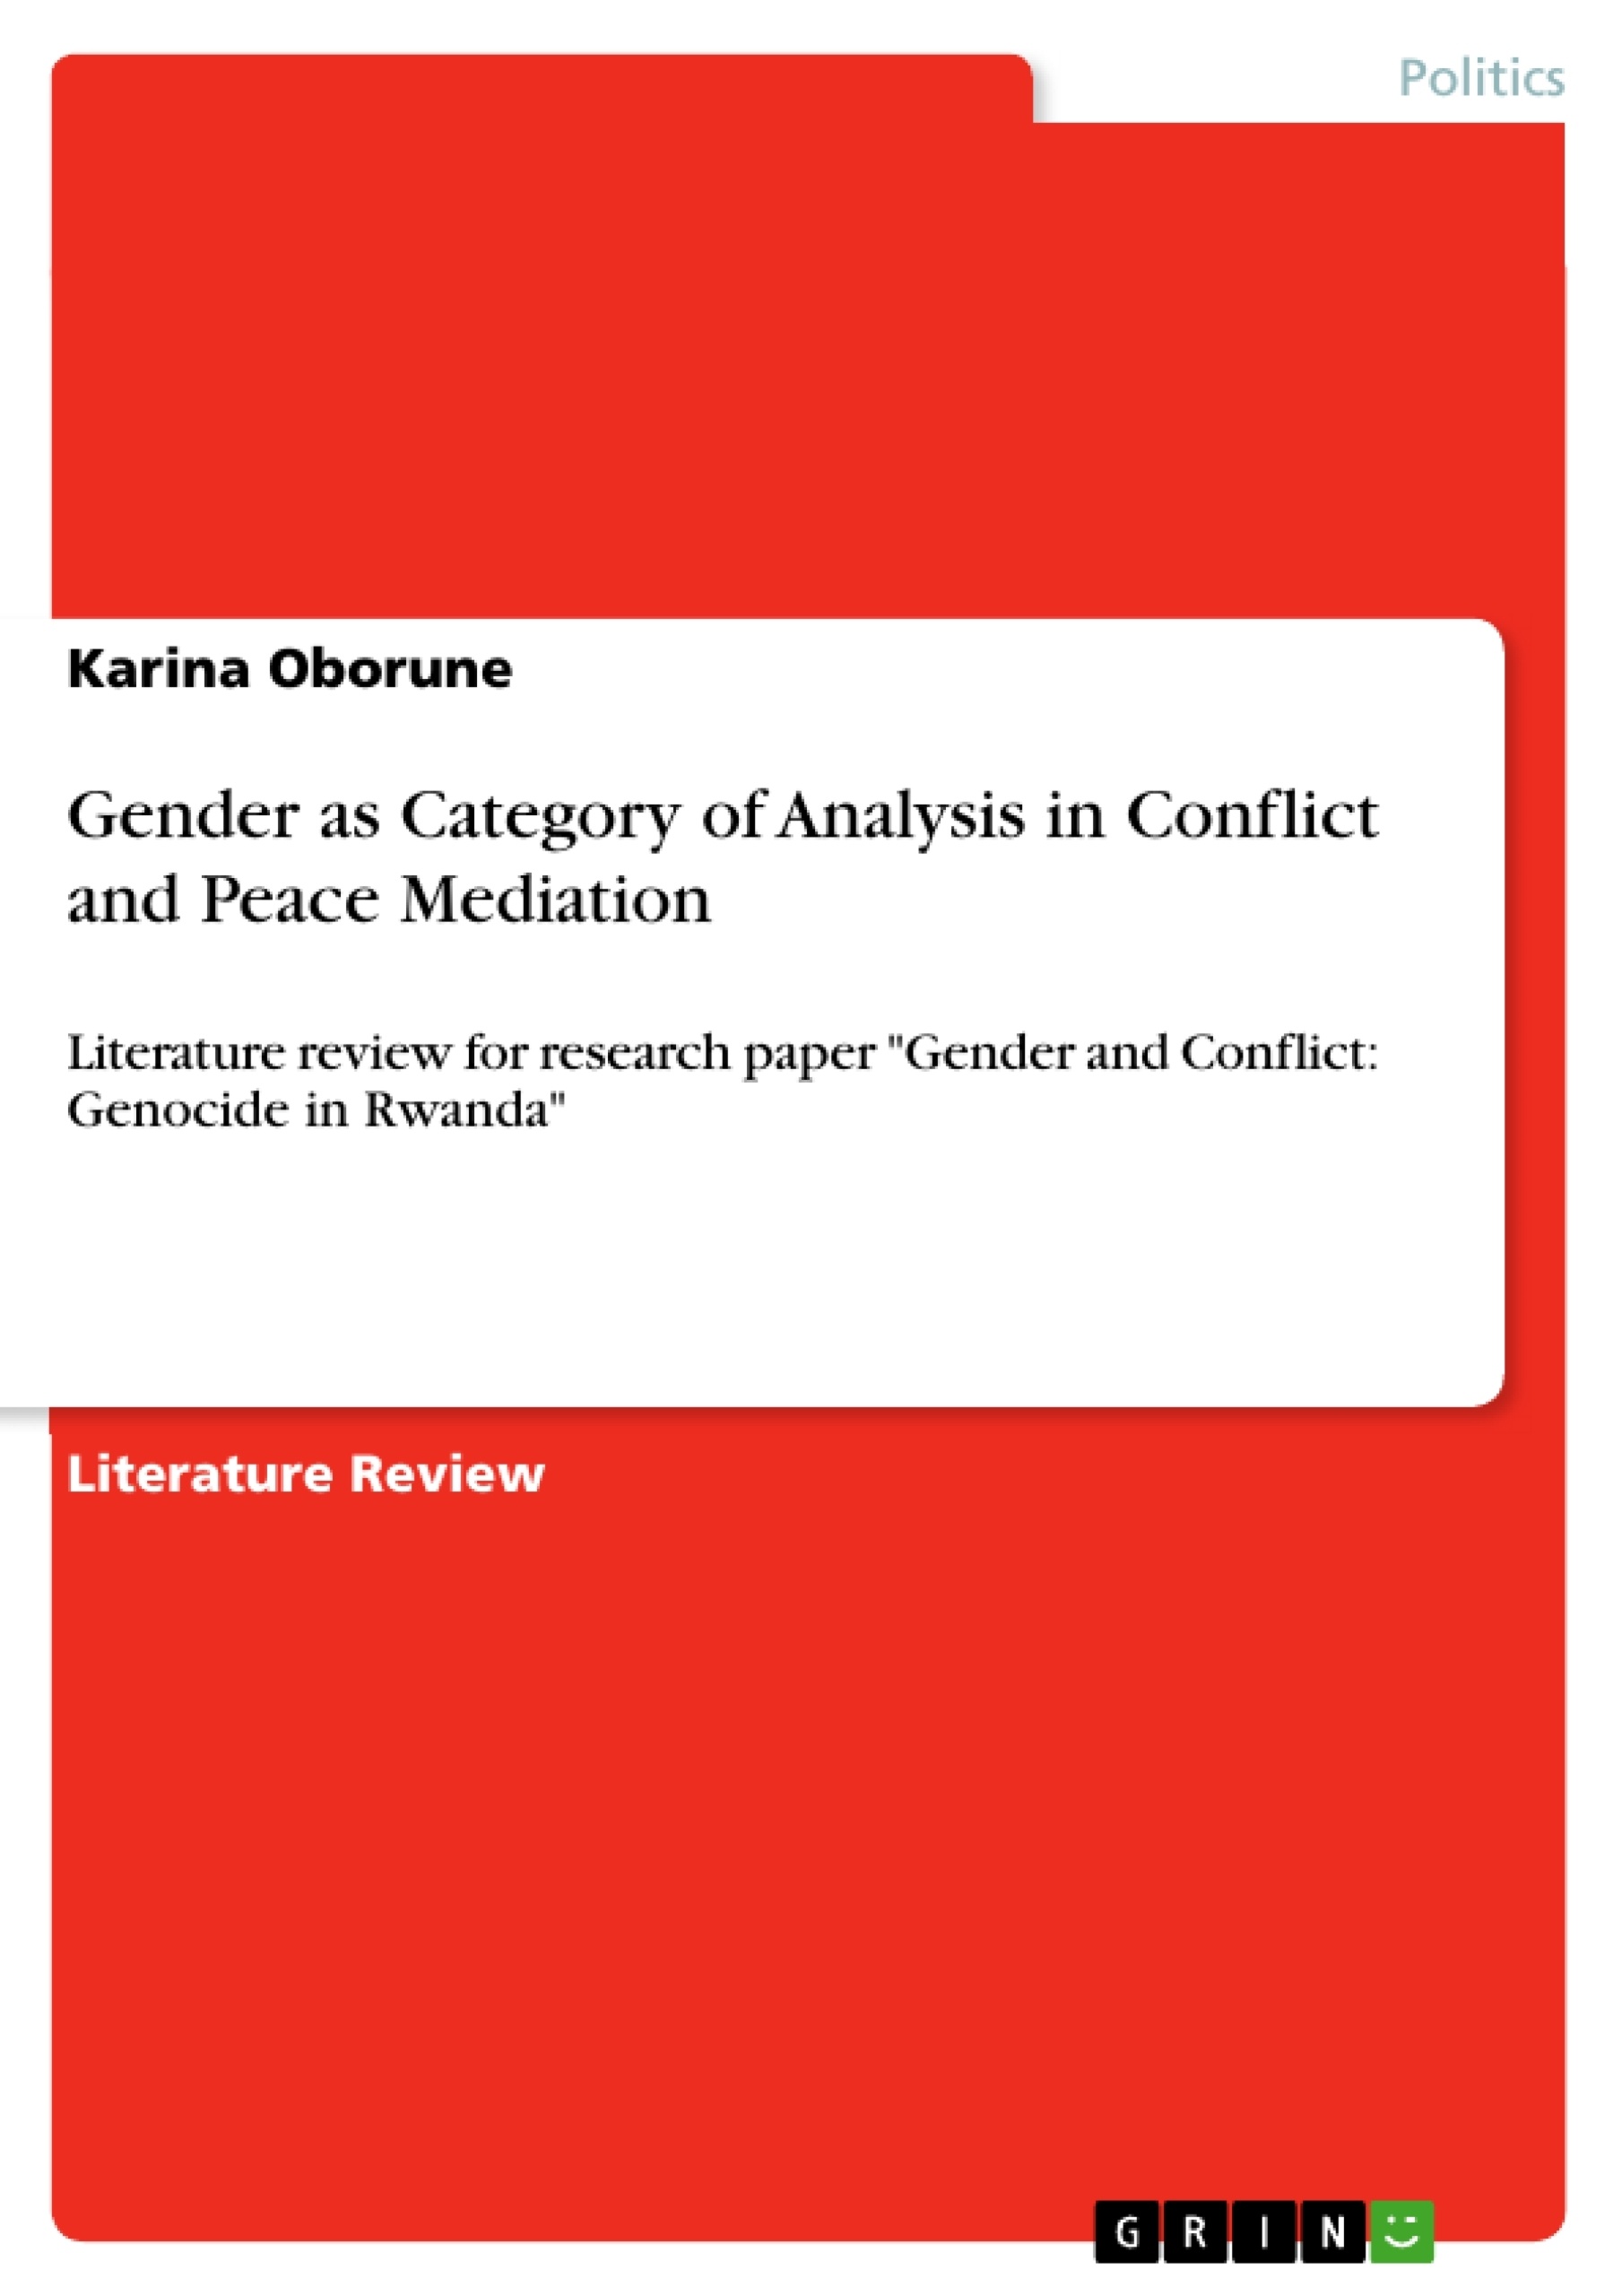 Titre: Gender as Category of Analysis in Conflict and Peace Mediation